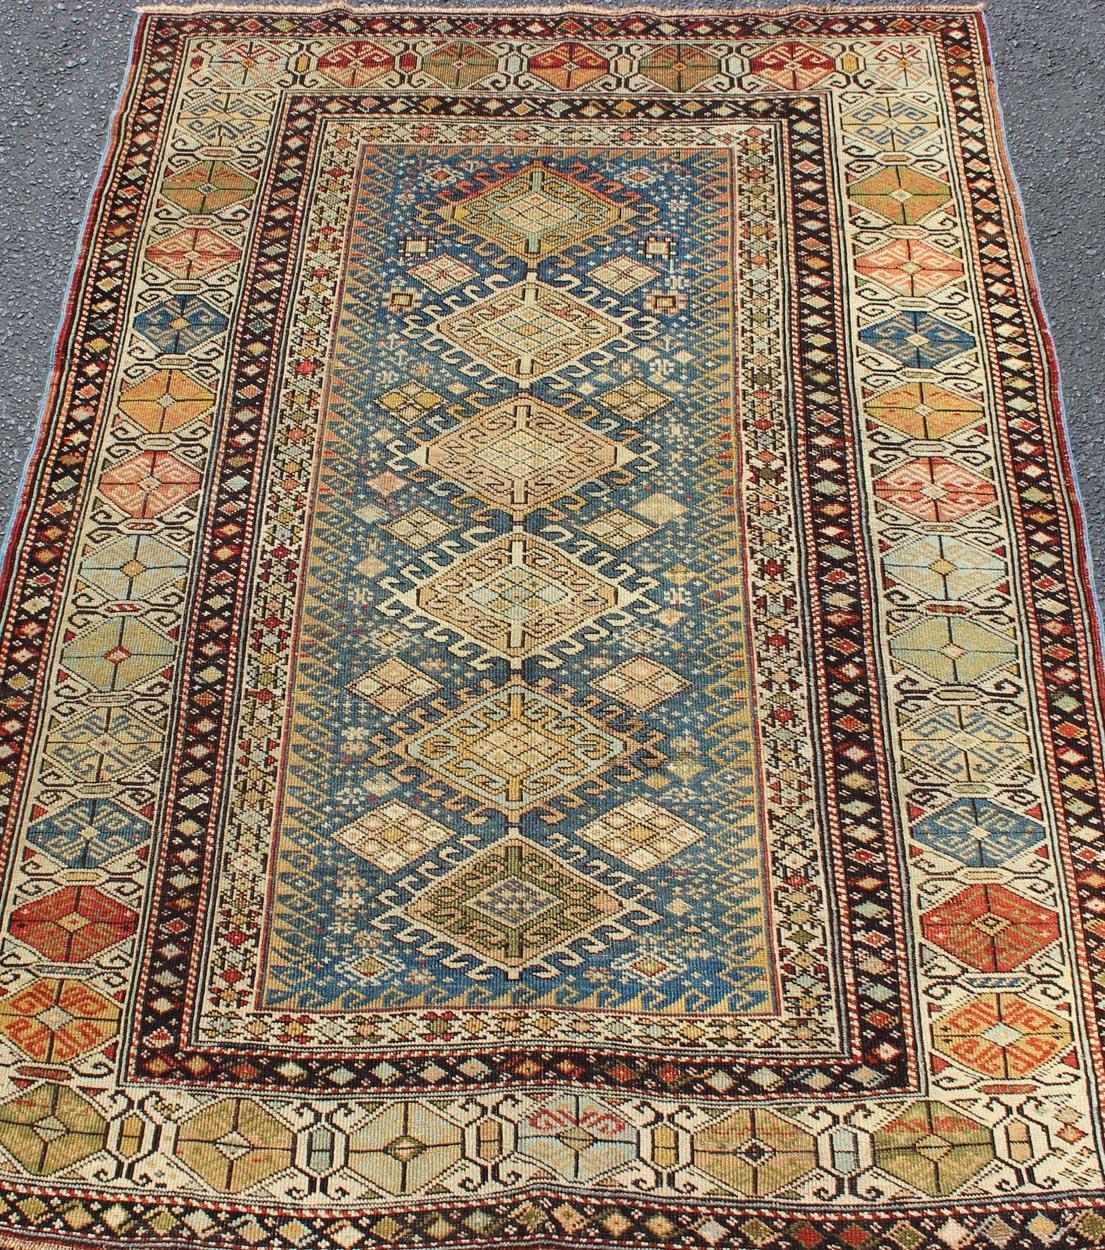 Hand-Knotted Antique Shirvan Rug in Teal Blue Background with Exquisitely Intricate Design For Sale